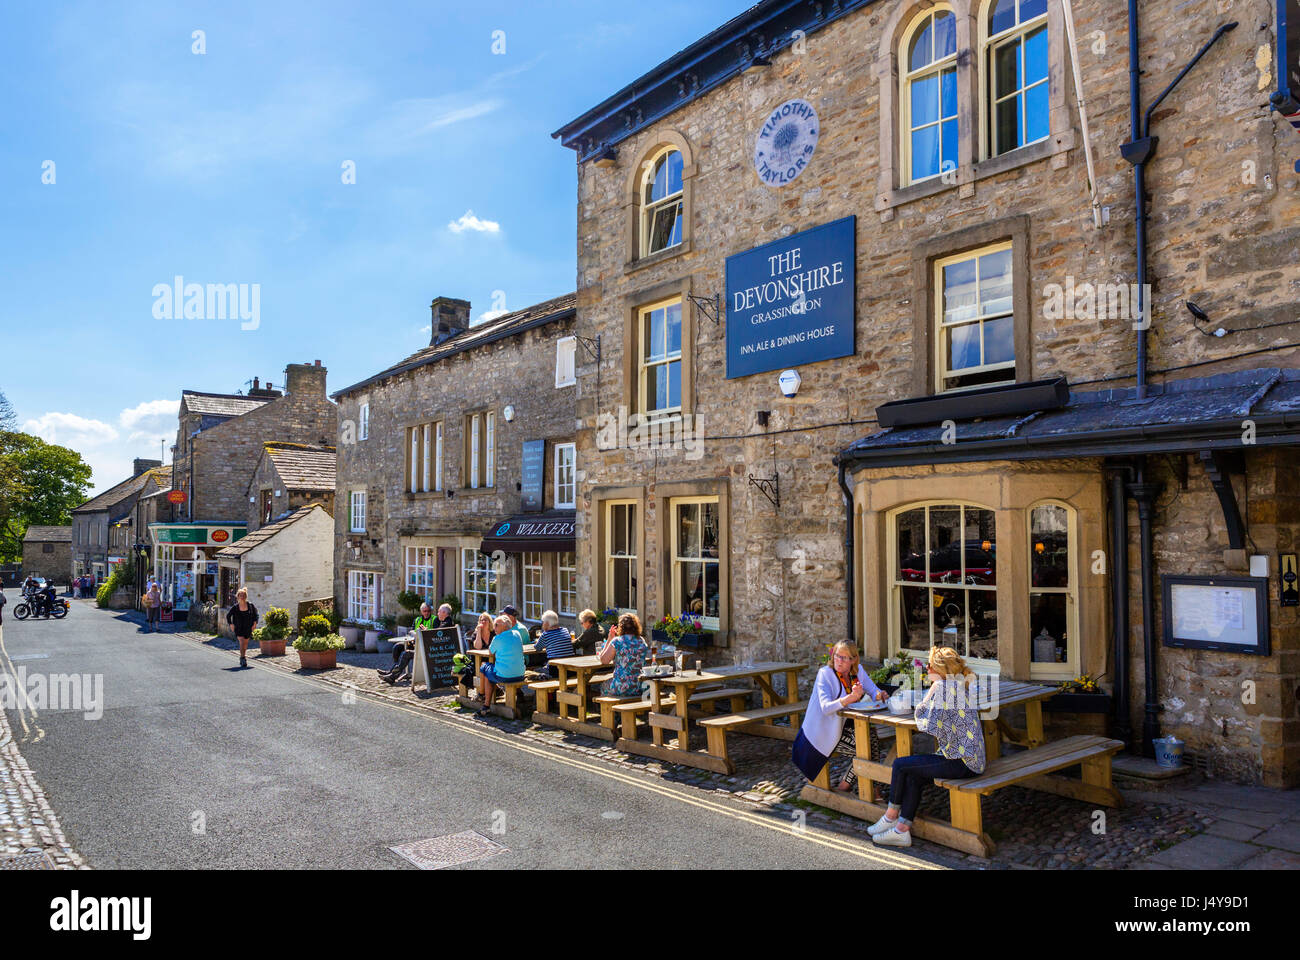 The Devonshire Inn on the Square, Grassington, Wharfedale, Yorkshire Dales National Park, North Yorkshire, Inghilterra, Regno Unito. Foto Stock